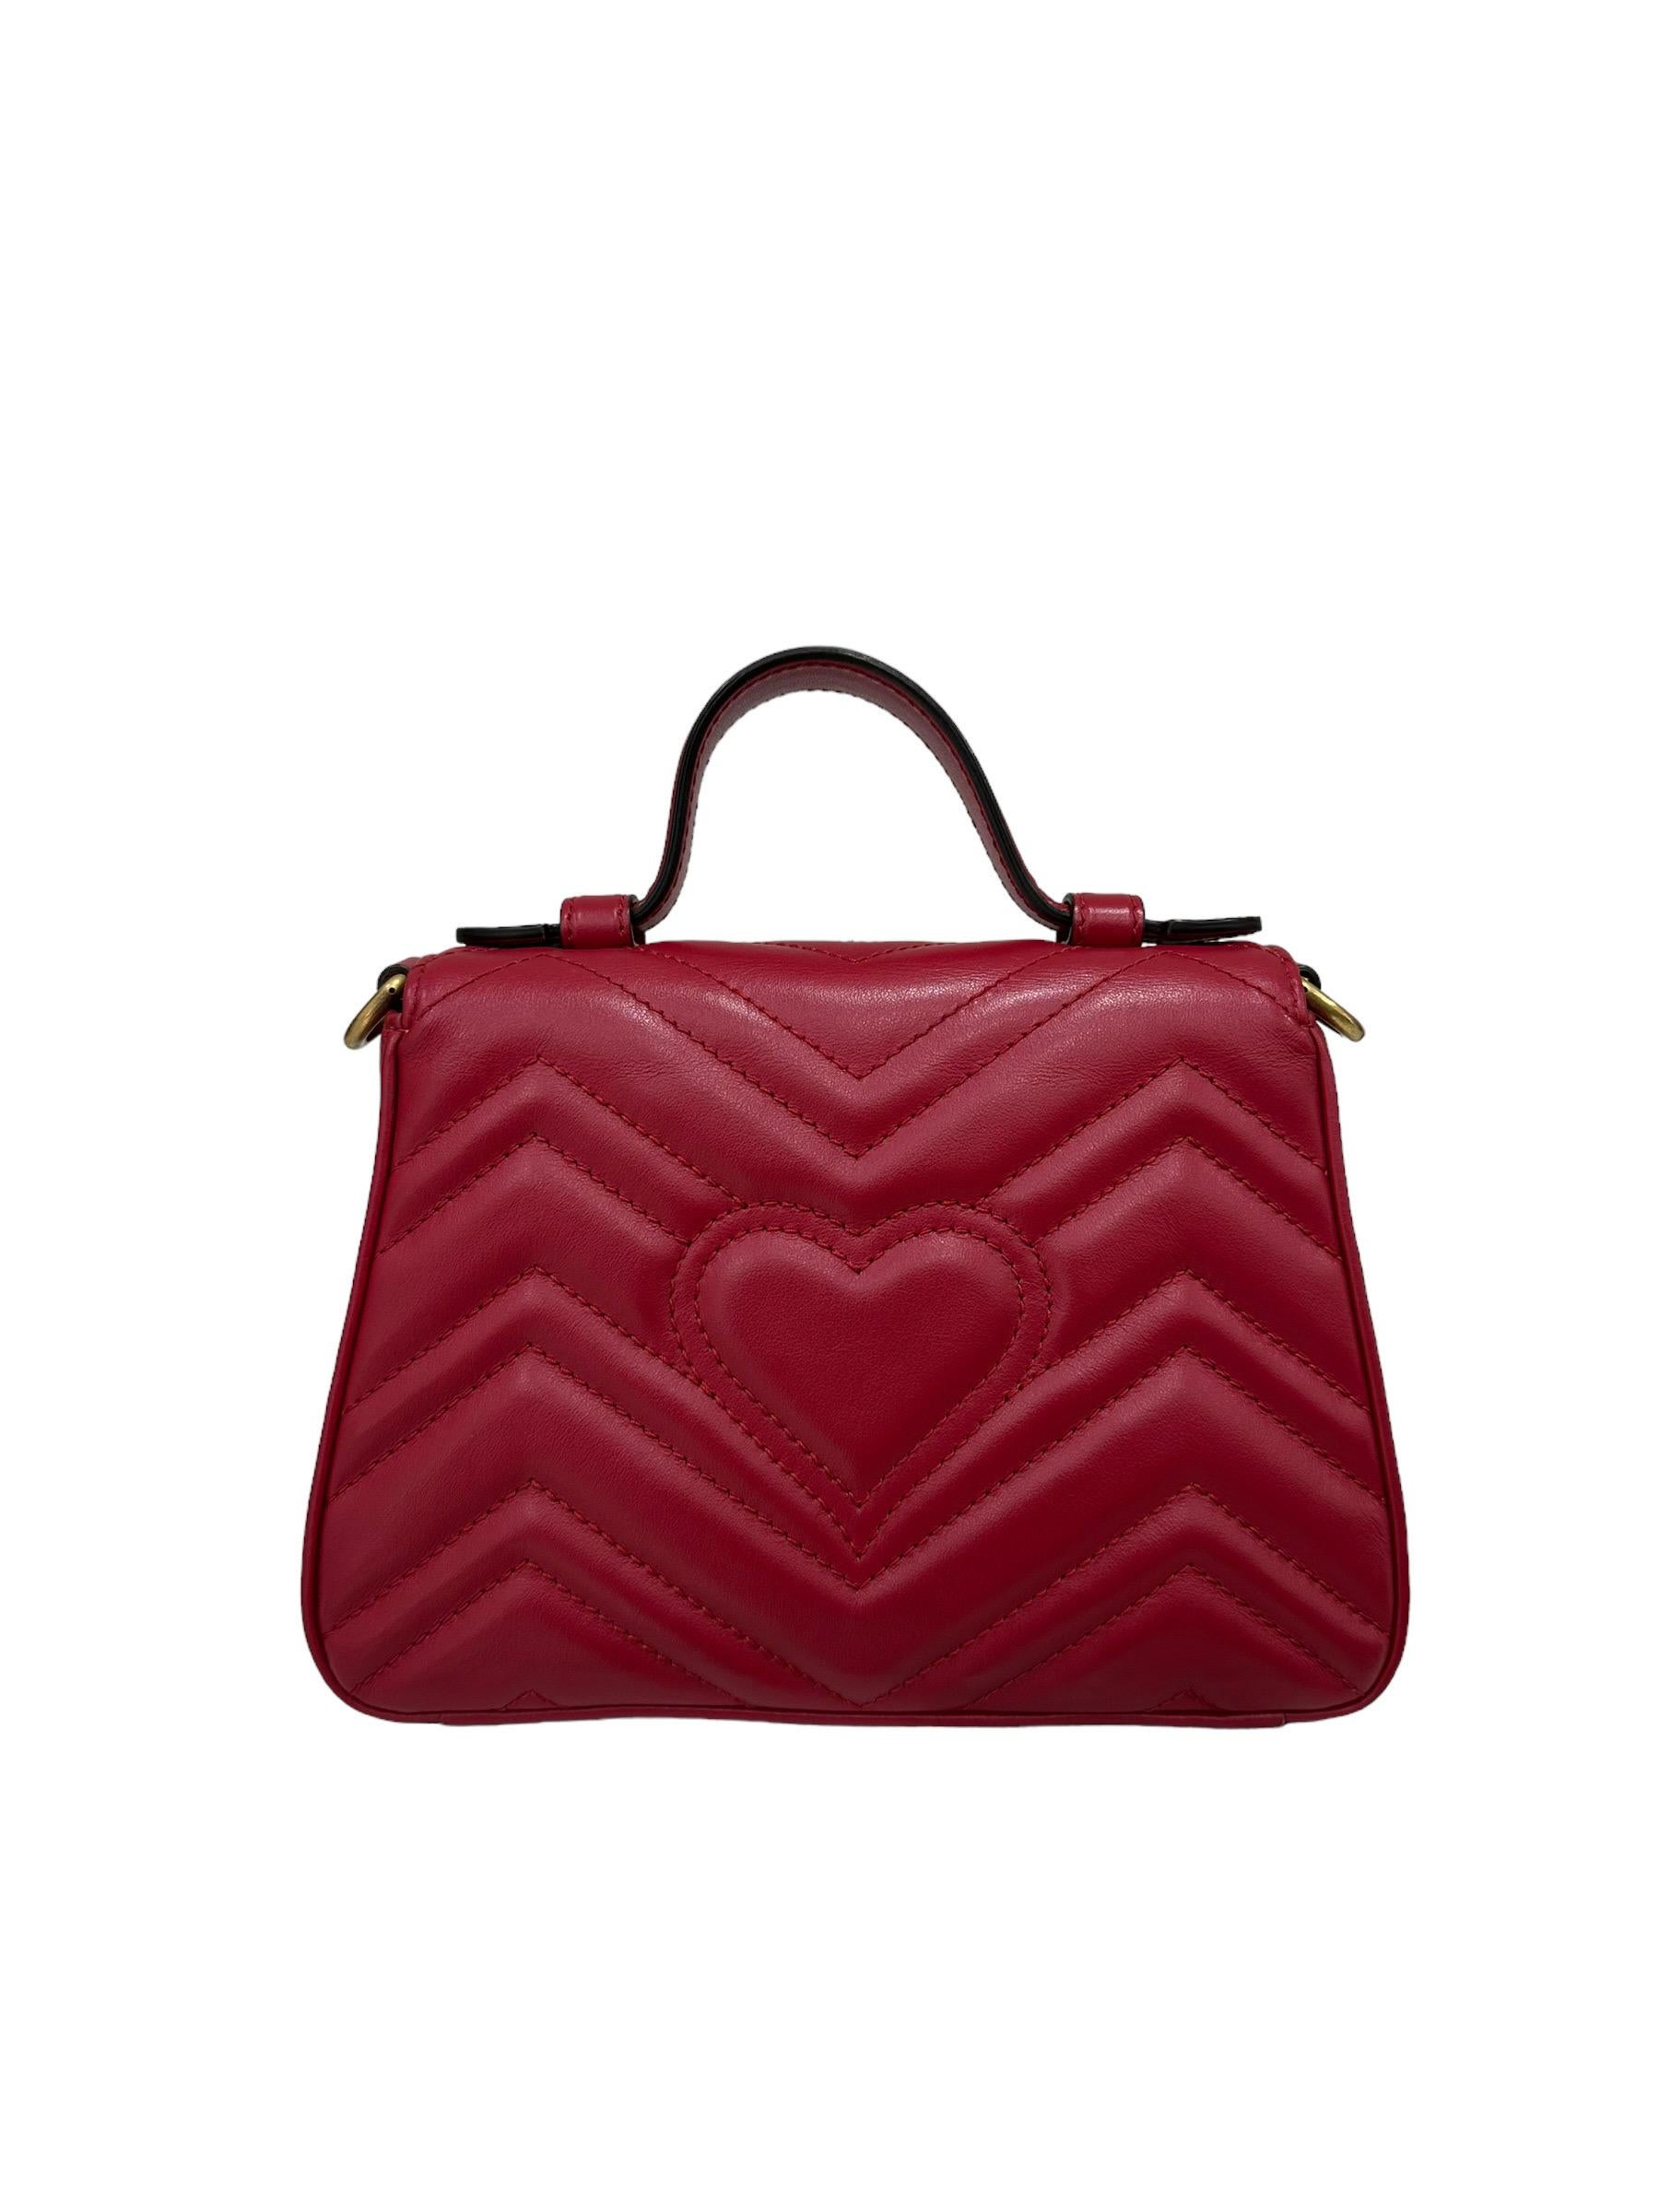 Gucci Marmont 20 Handle Rossa 4